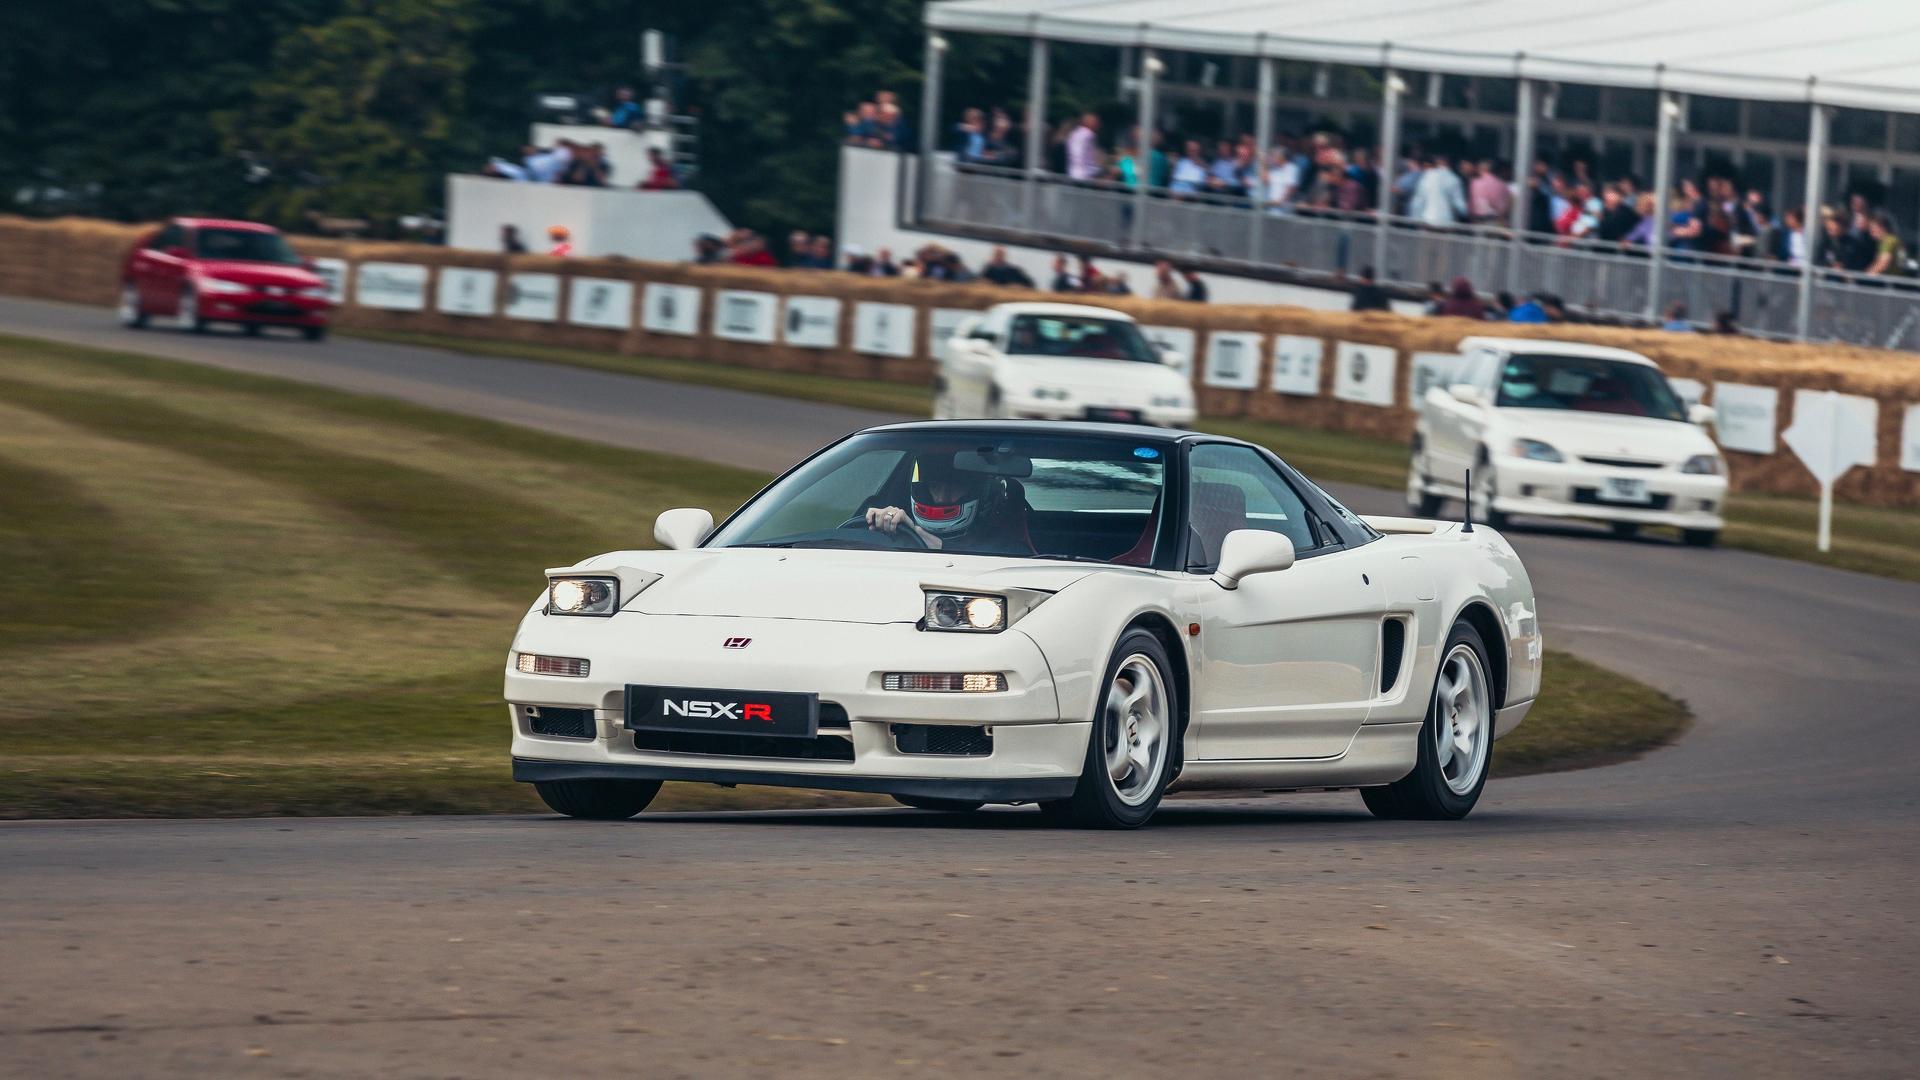 25 Years of Type R at Goodwood Festival of Speed 2017